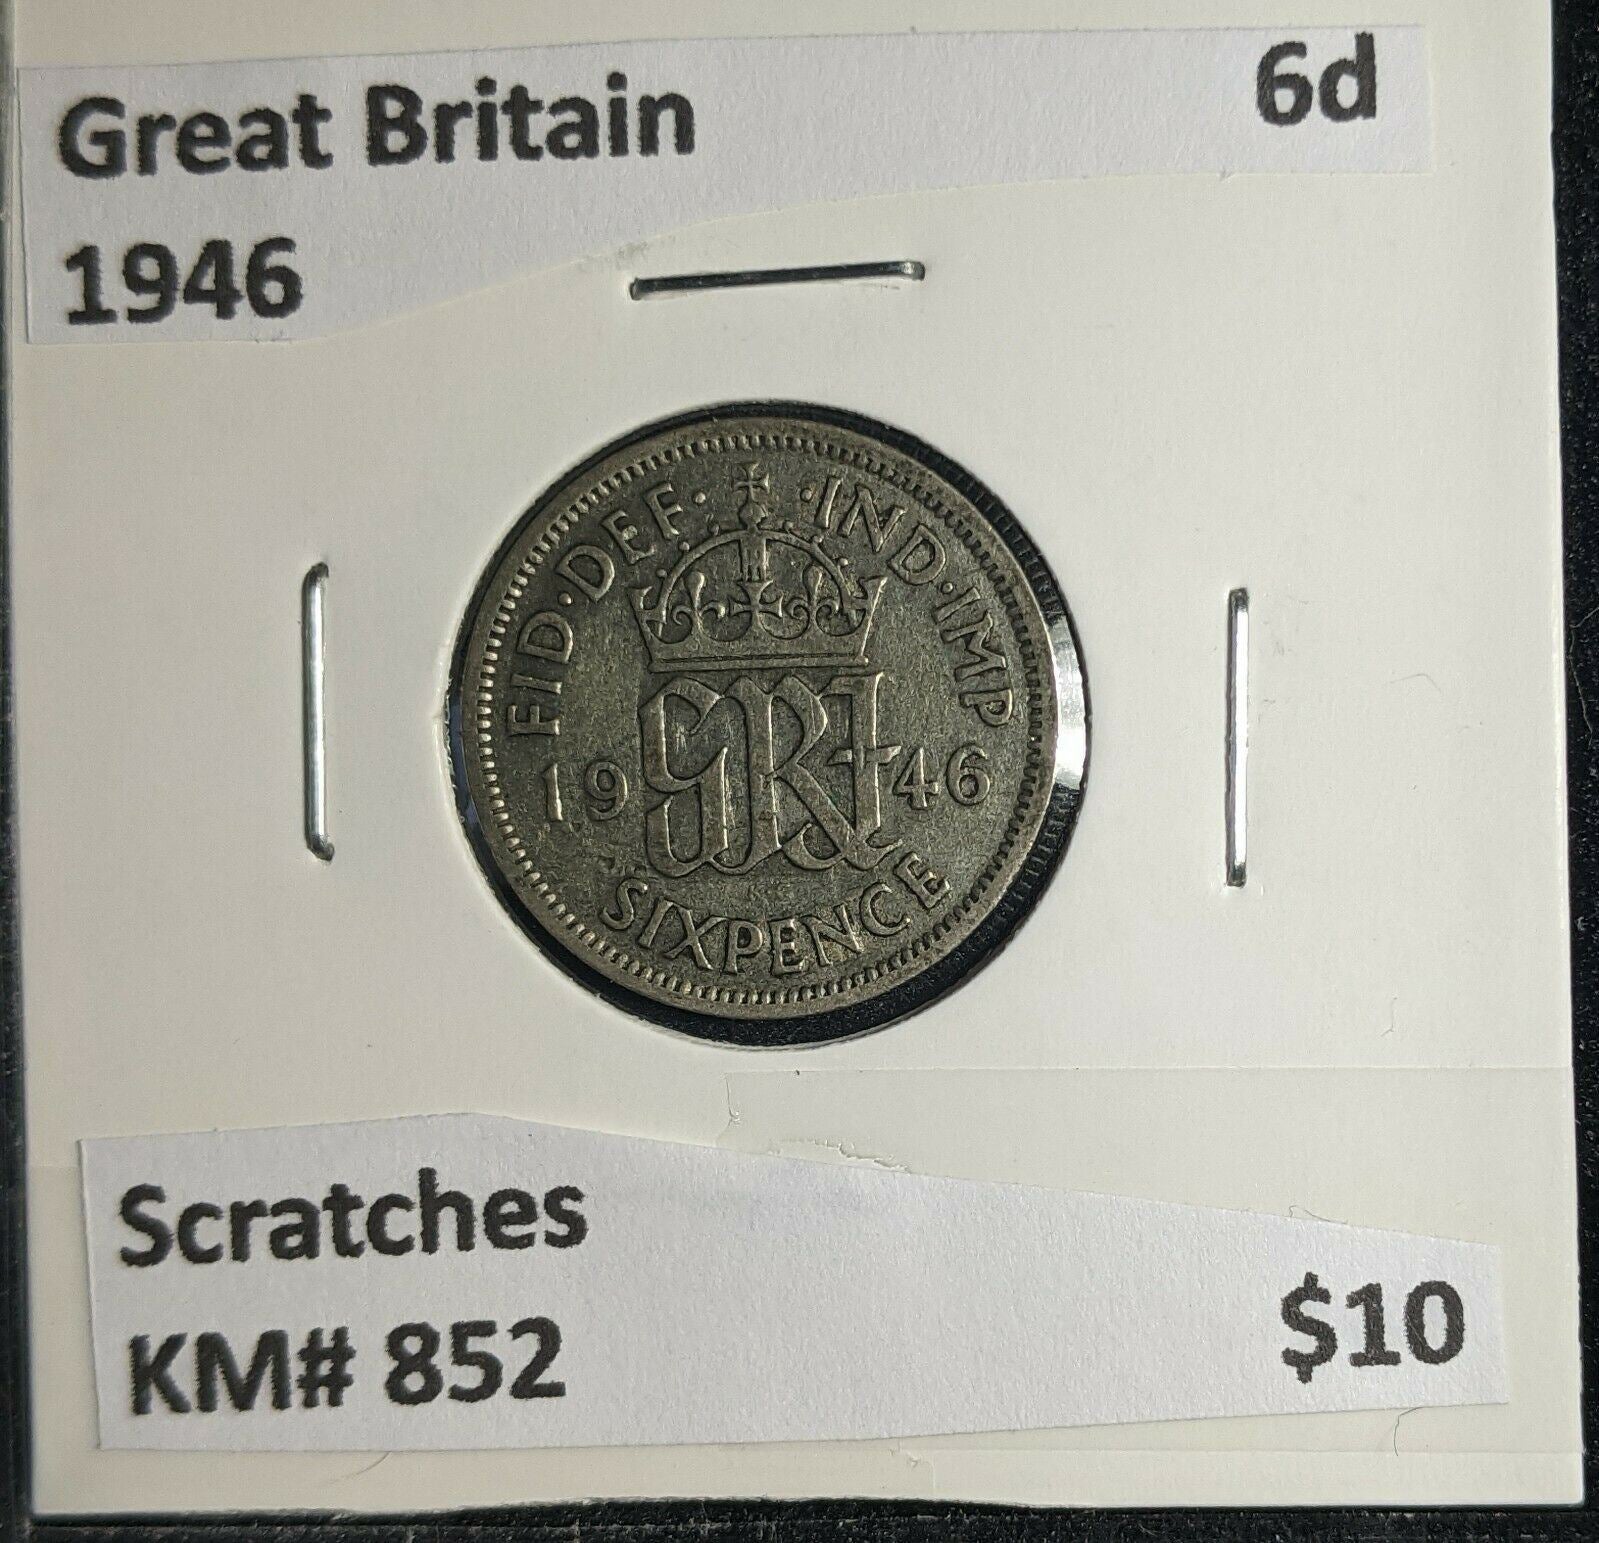 Great Britain 1946 6 Pence Sixpence 6d KM# 852 Scratches #348 4C